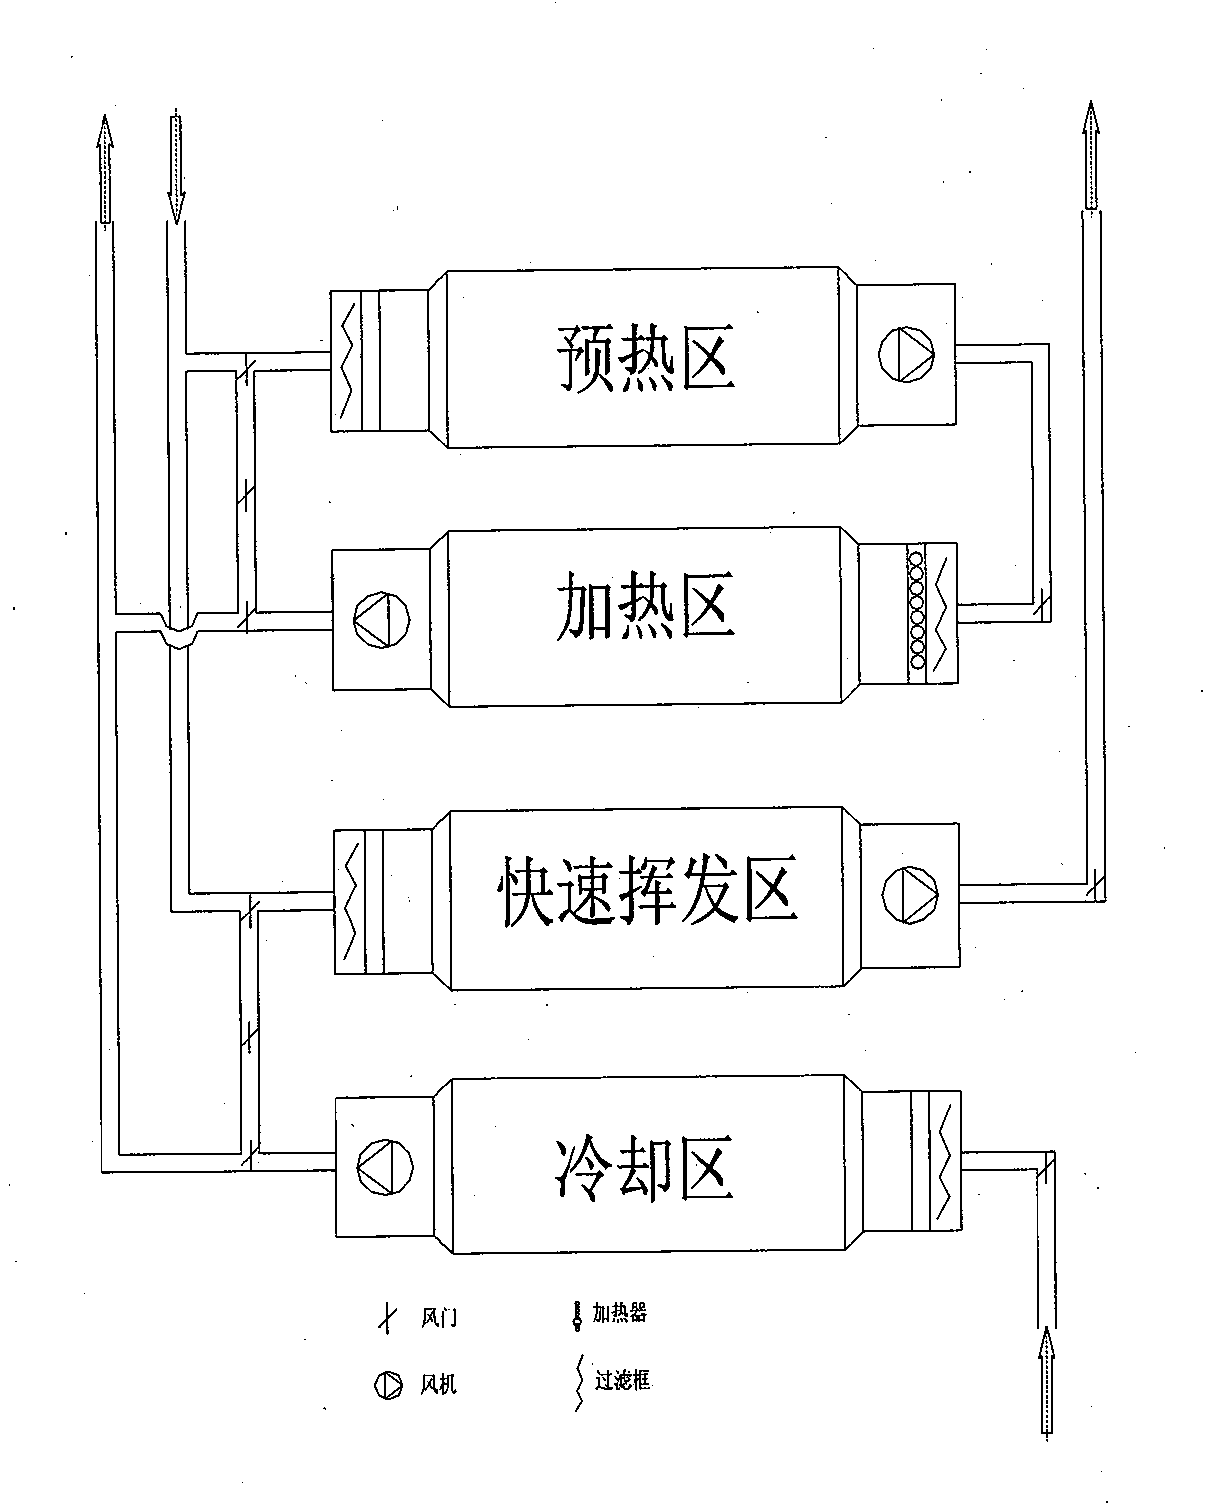 Vertical drying shed and drying method